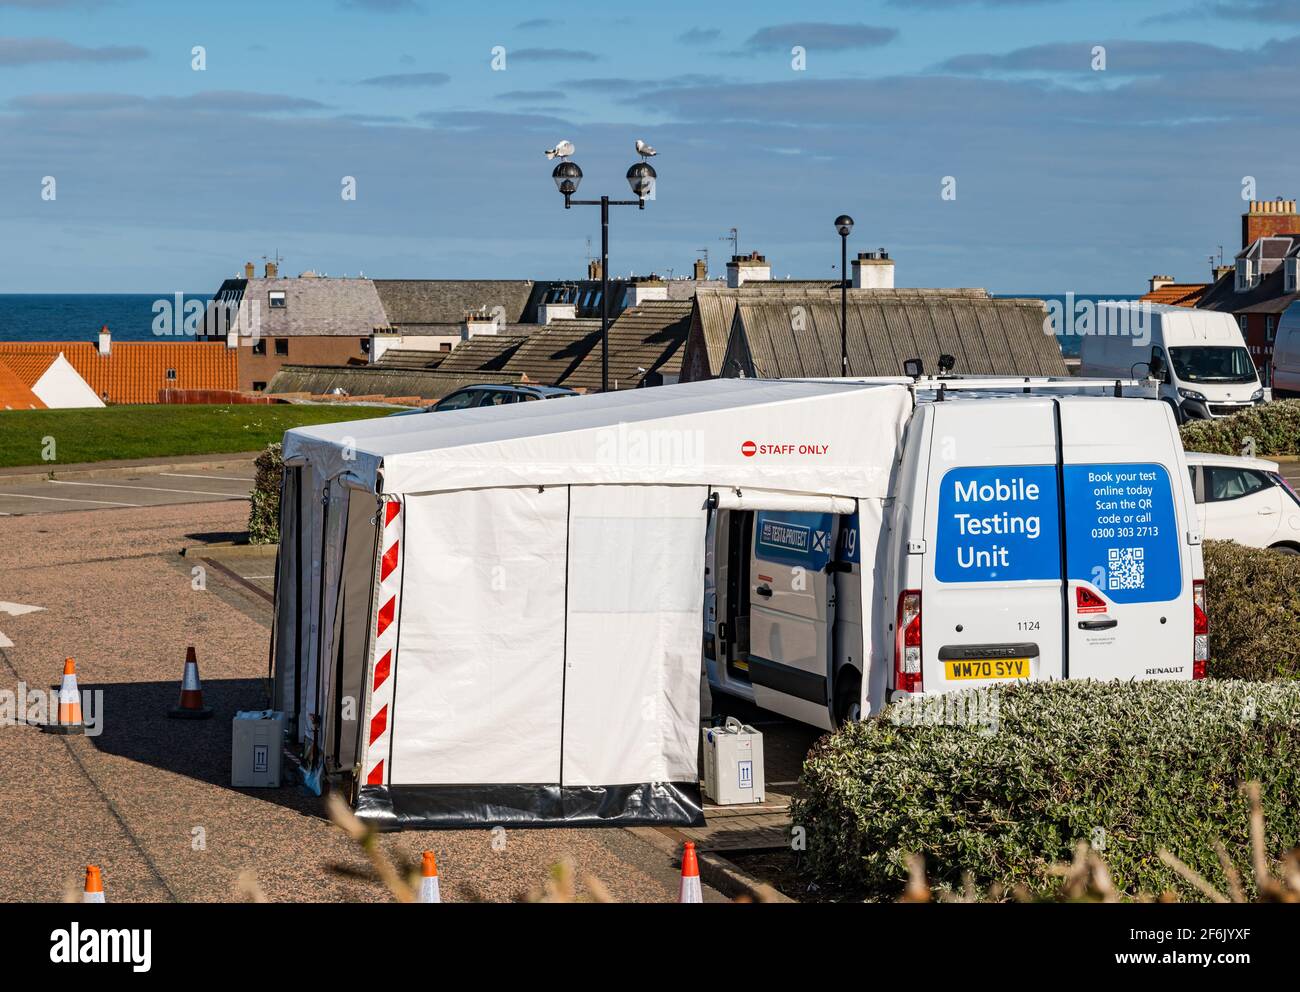 Dunbar, East Lothian, Scotland, United Kingdom. 1st Apr, 2021. Mobile asymptomatic Covid-19 testing unit: This is one of two mobile Covid-19 asymptomatic testing units deployed in East Lothian to help identify positive cases and break chains of transmission. People with no symptoms of Covid-19, but who may be infectious and spreading the disease without knowing it, can attend on a walk-in basis or book a test online. There were no takers within a half hour period Stock Photo